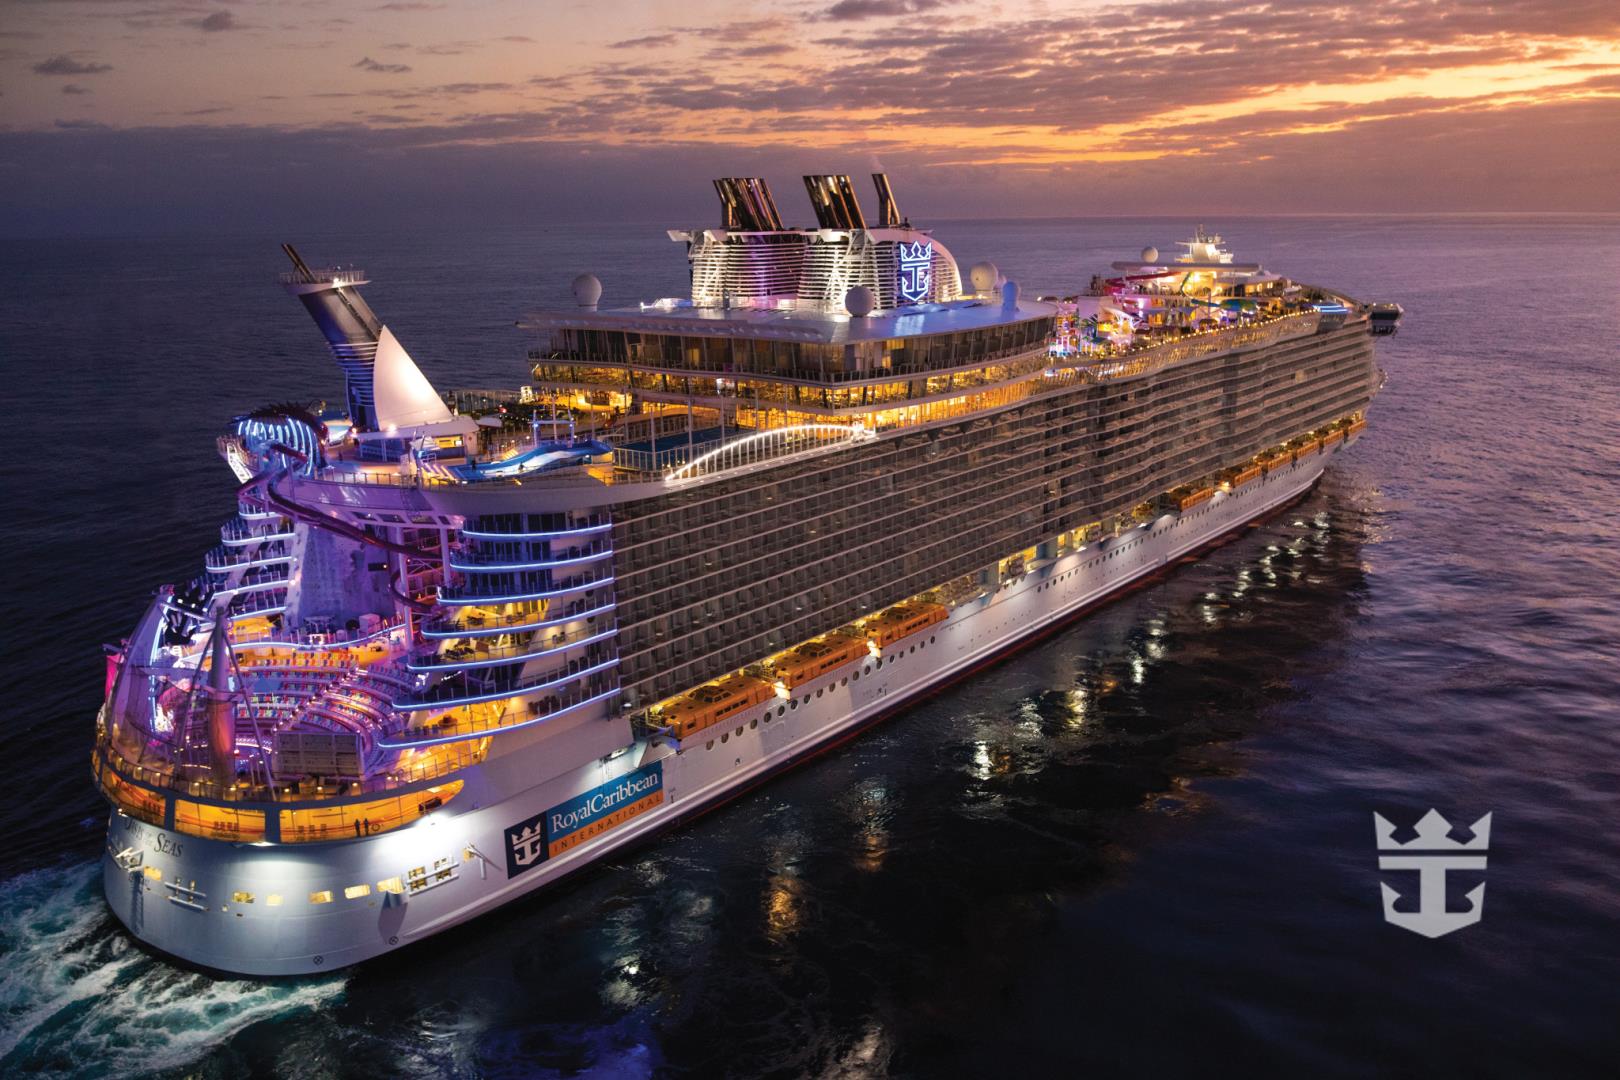 Side view of Oasis of the Seas at sunset - Photo Credit: Michel Verdure